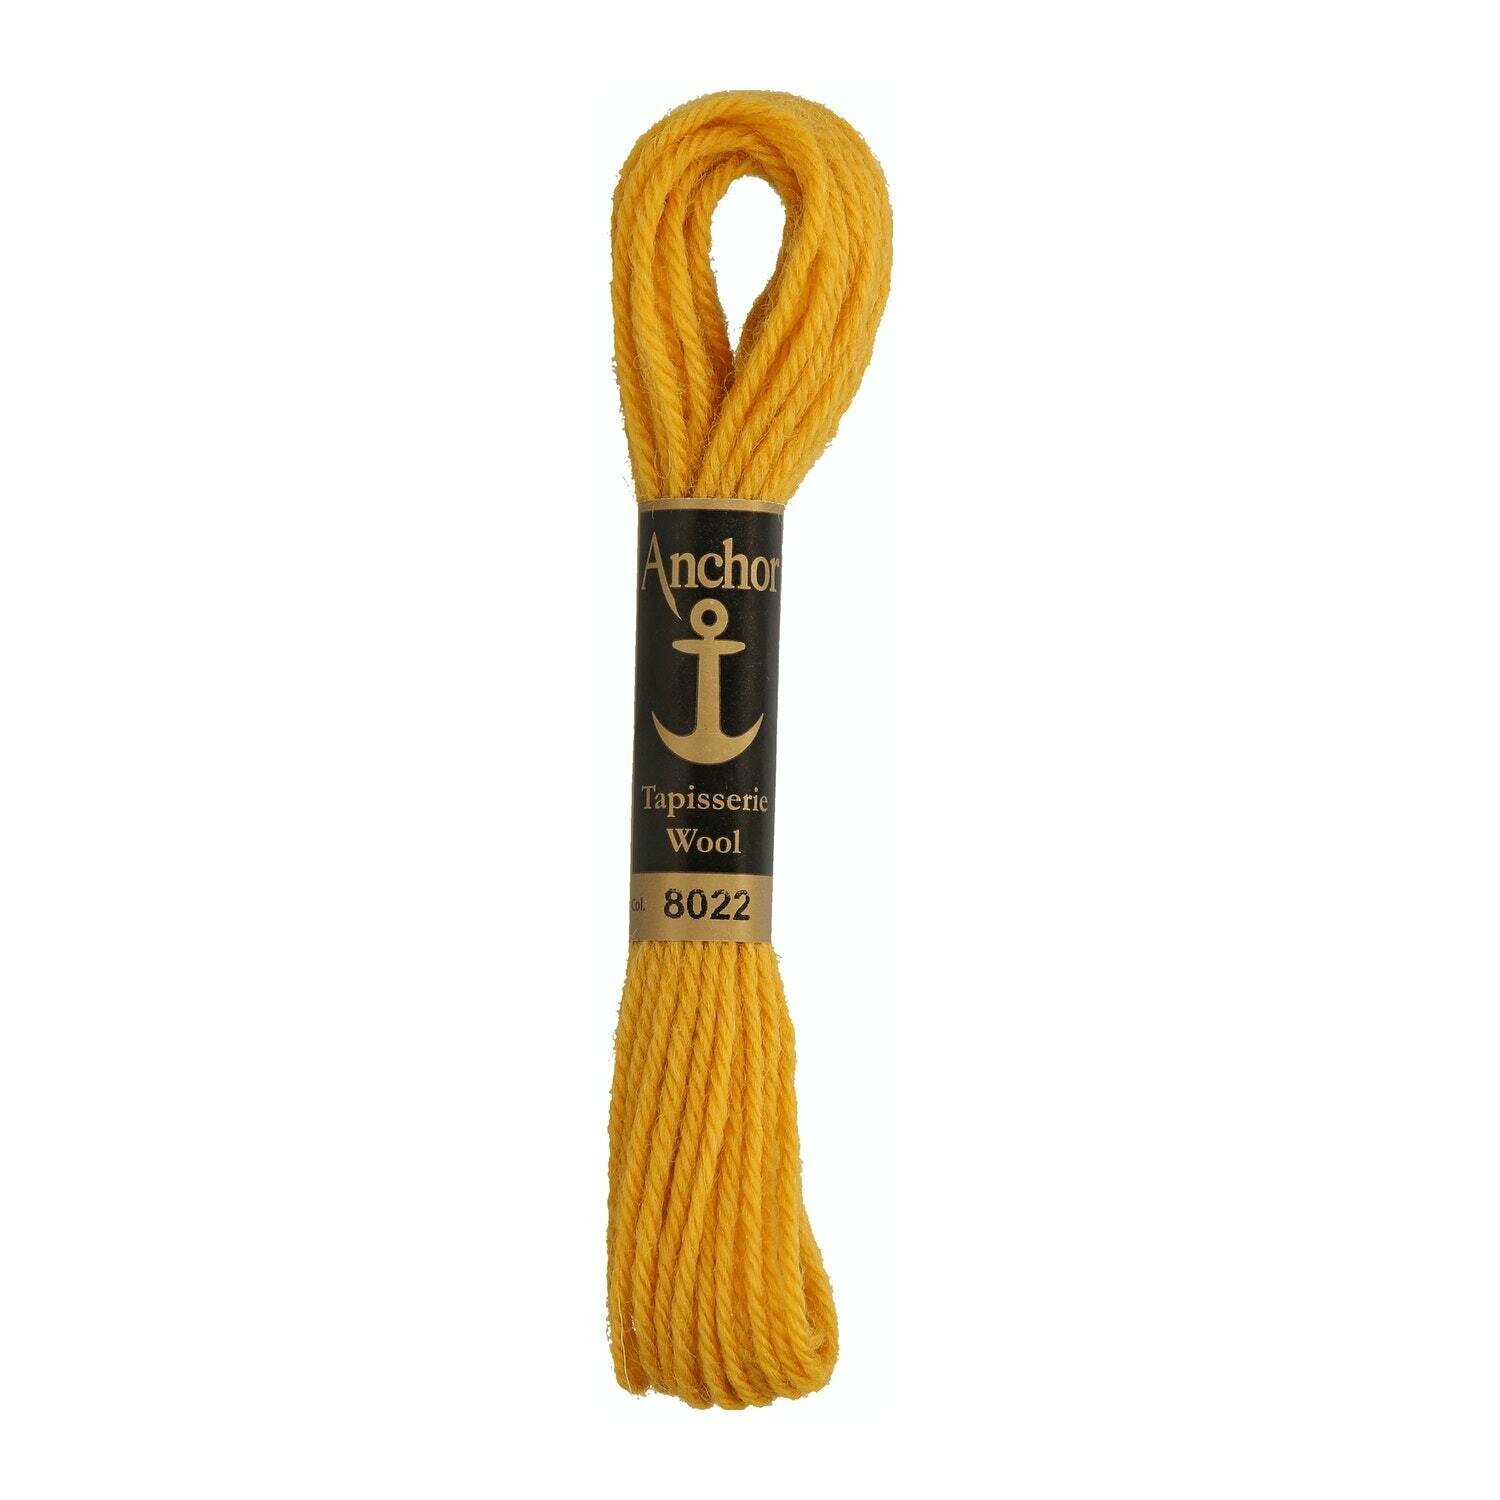 Anchor Tapisserie Wool #  08022